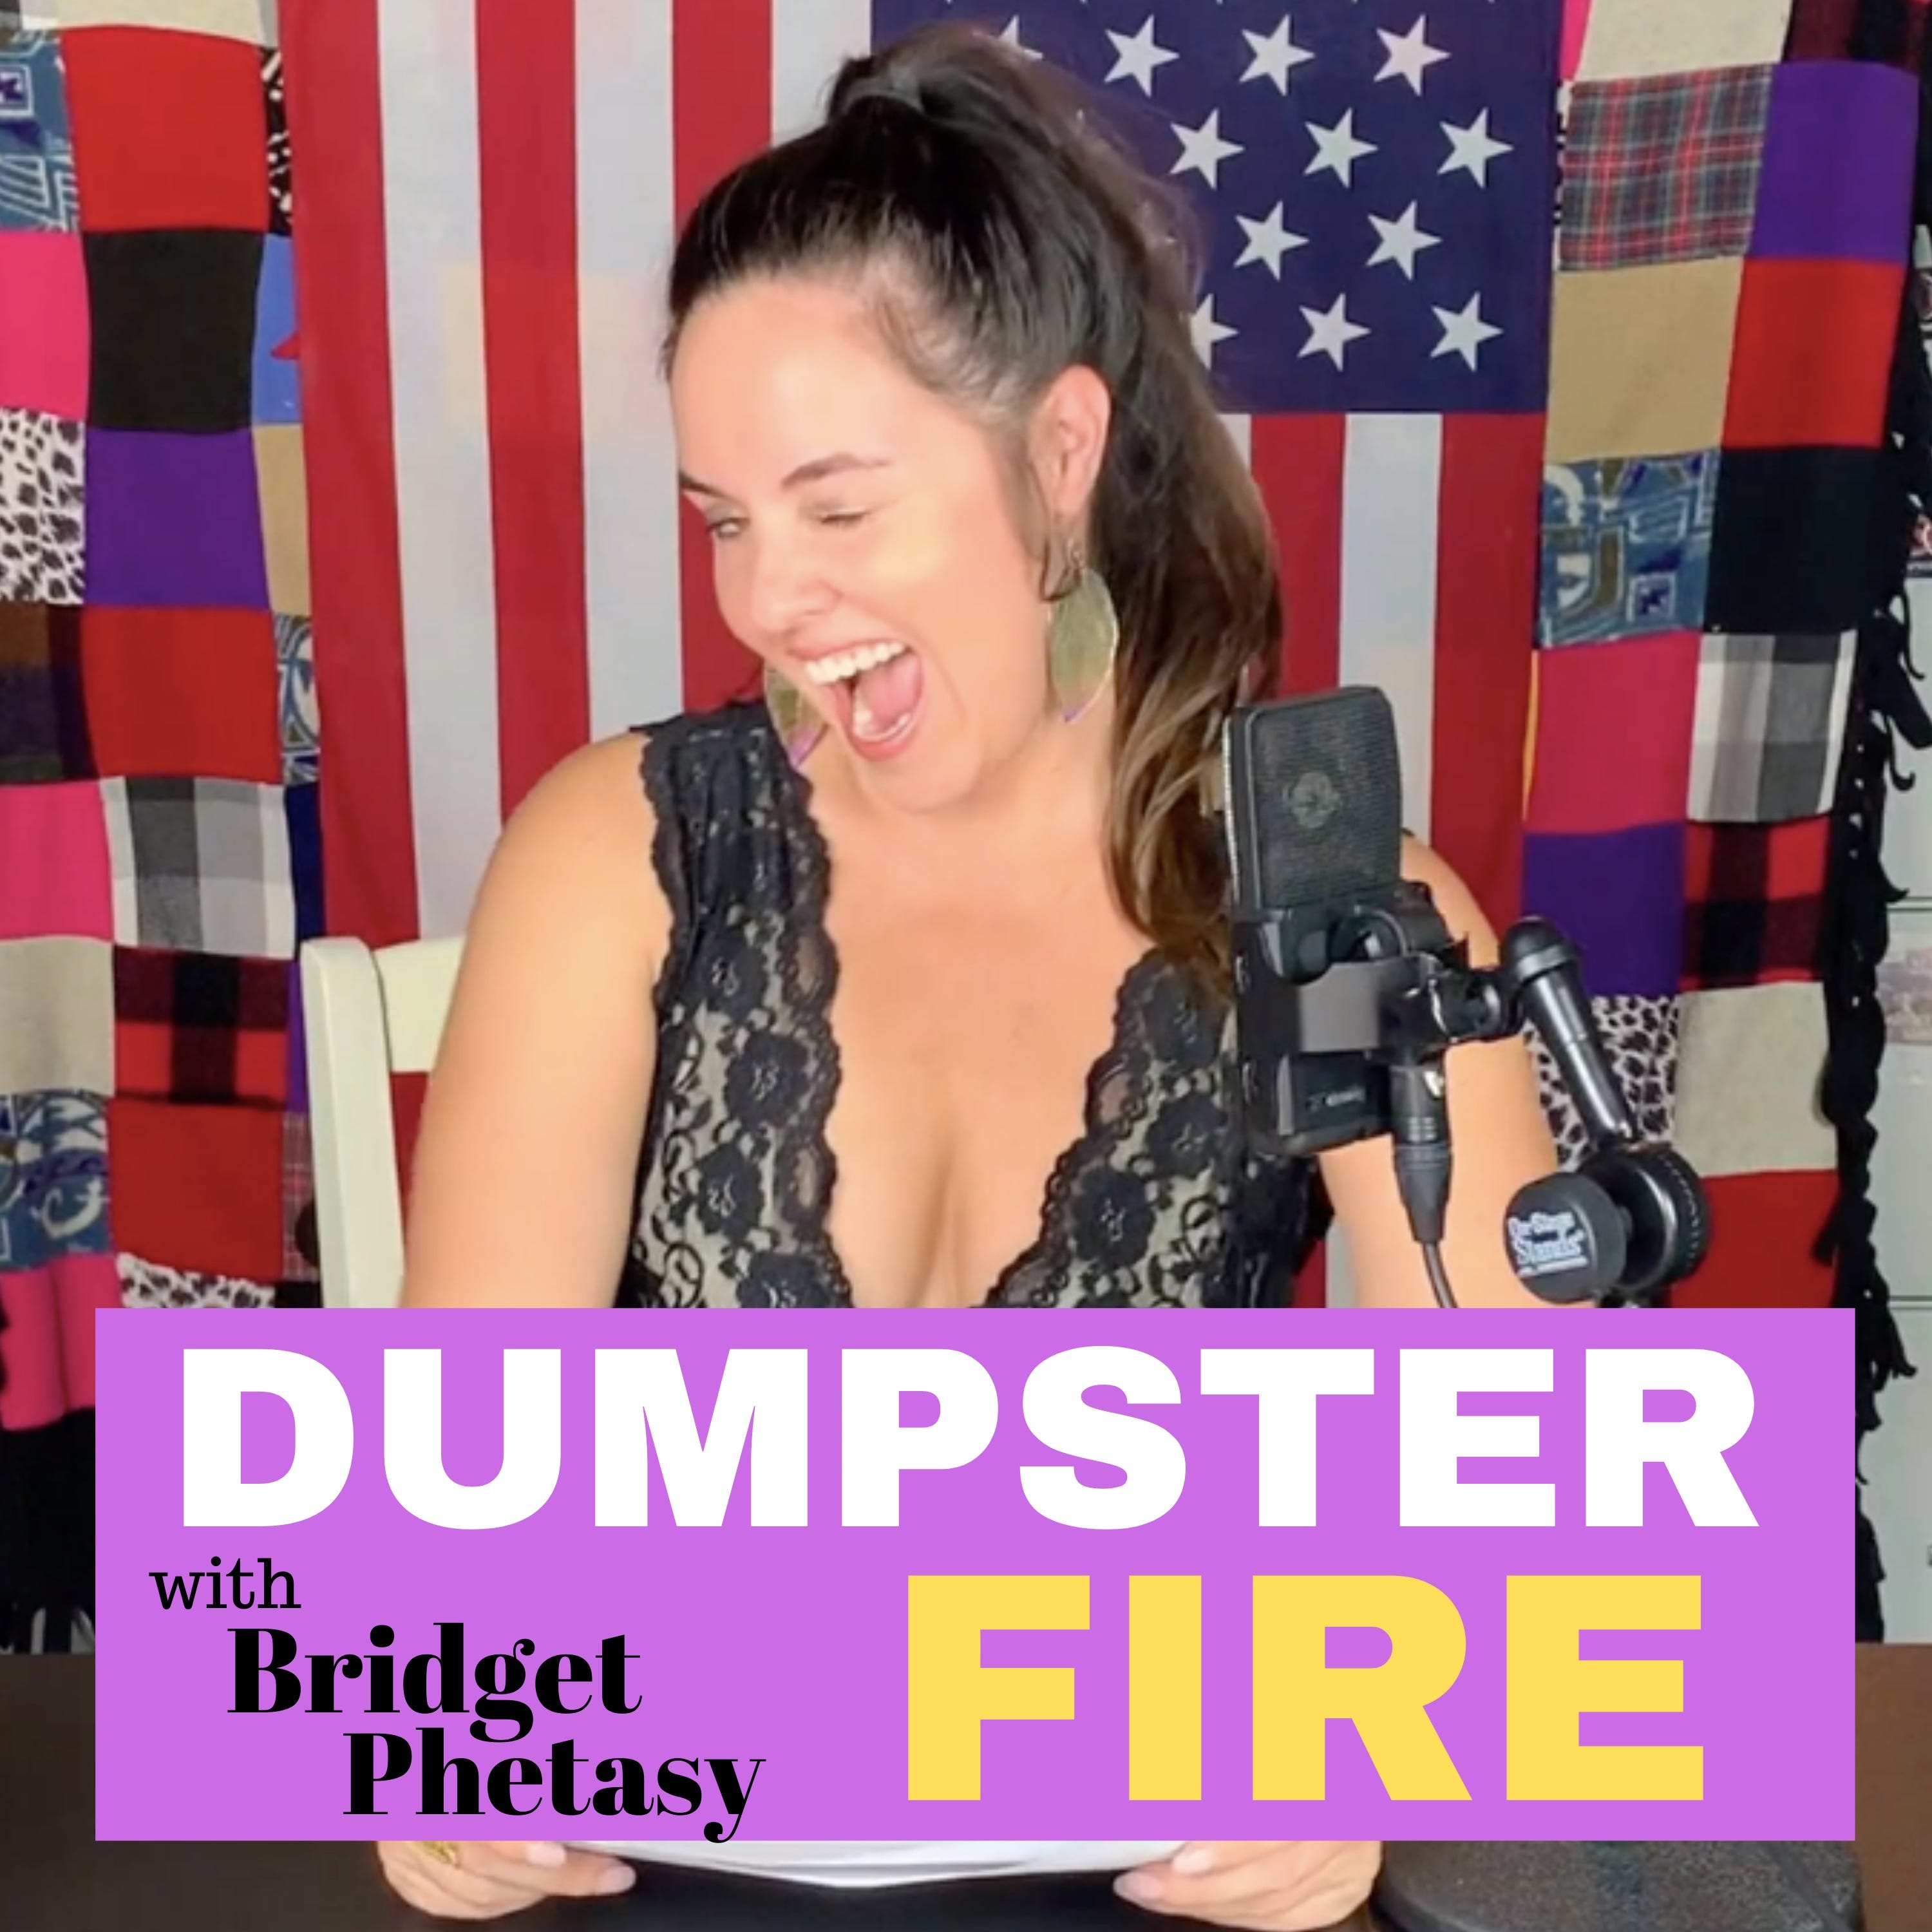 Dumpster Fire 4: Are You Not Entertained?